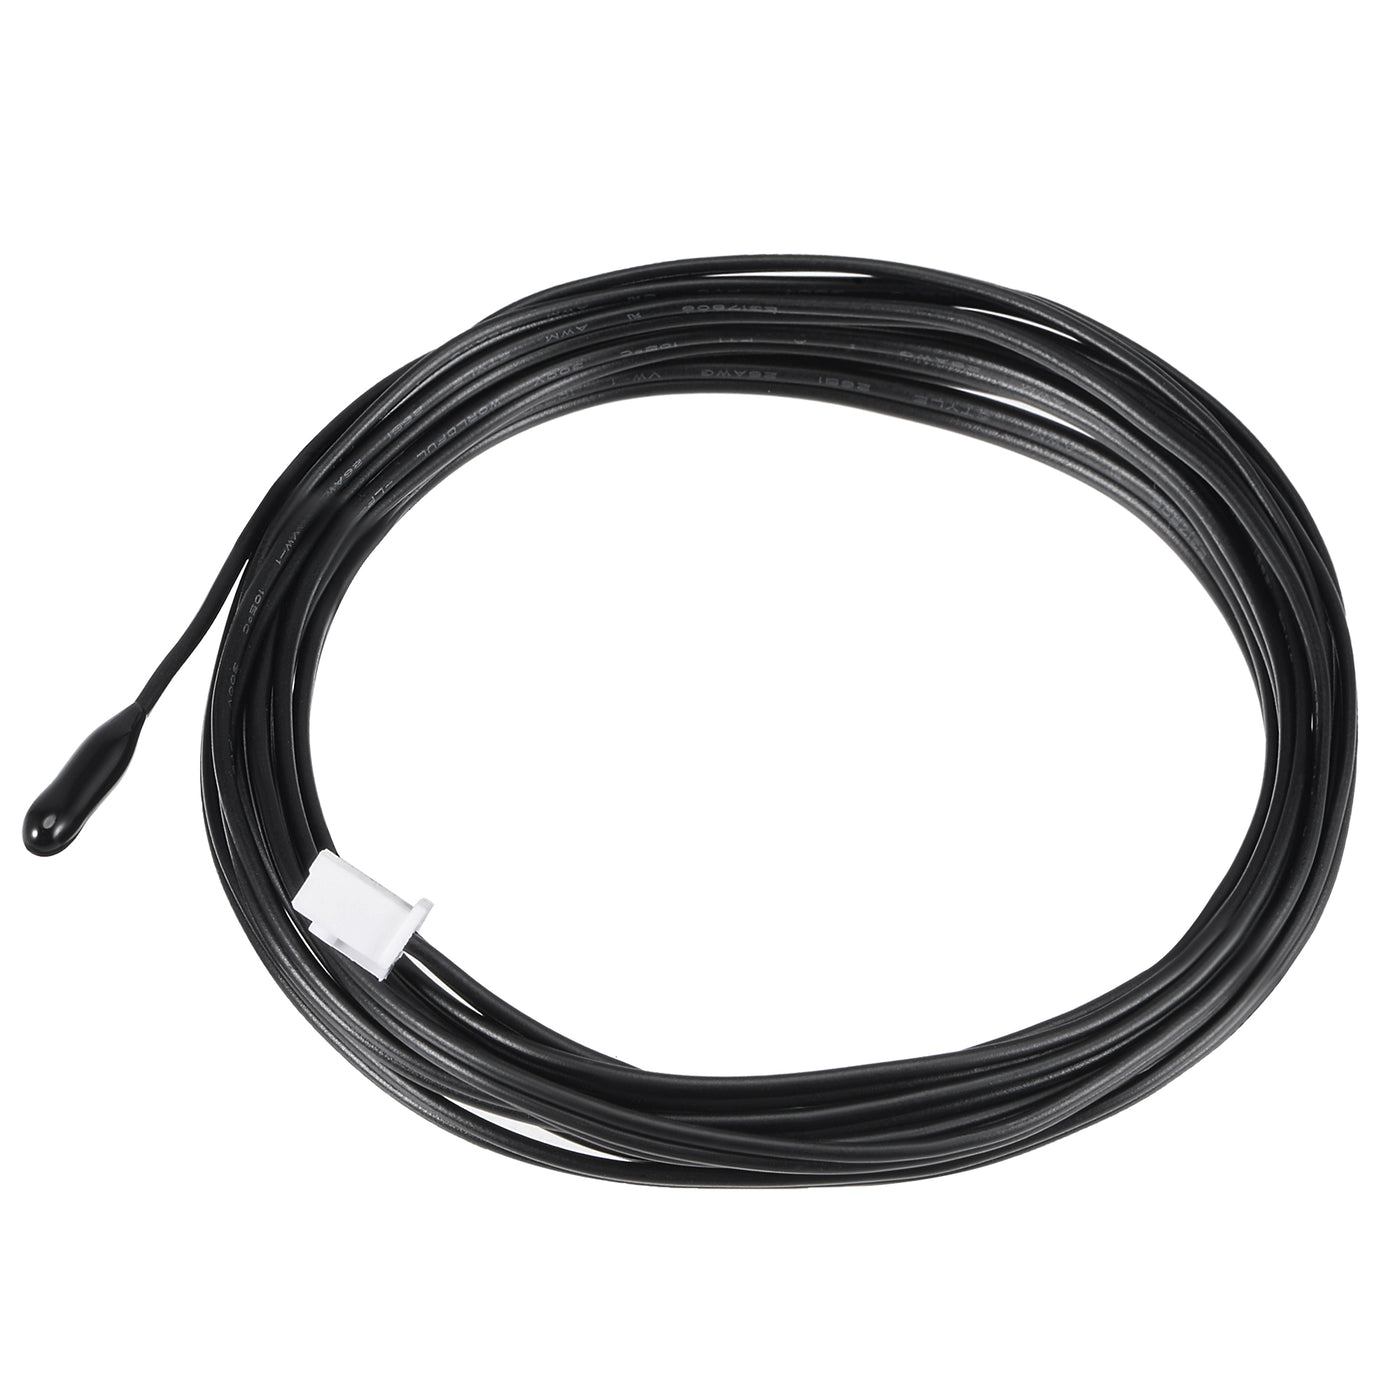 uxcell Uxcell 15K NTC Temperature Sensor Probe 6.6ft Digital Thermometer Extension Cable